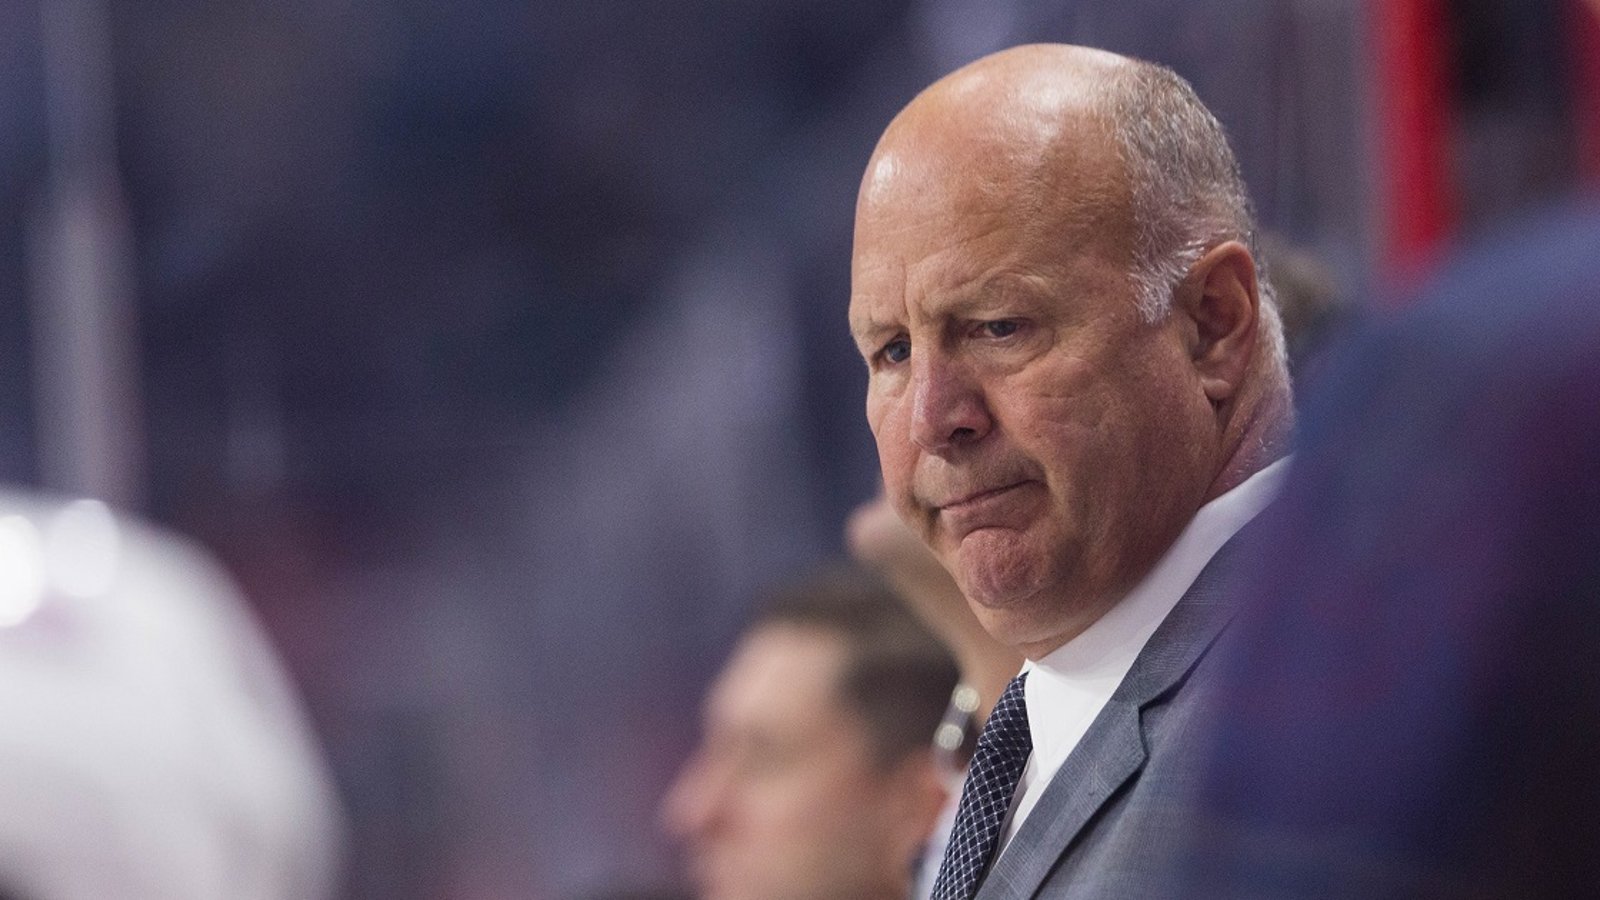 Claude Julien calls out his players, but Habs insider points the finger at him instead.